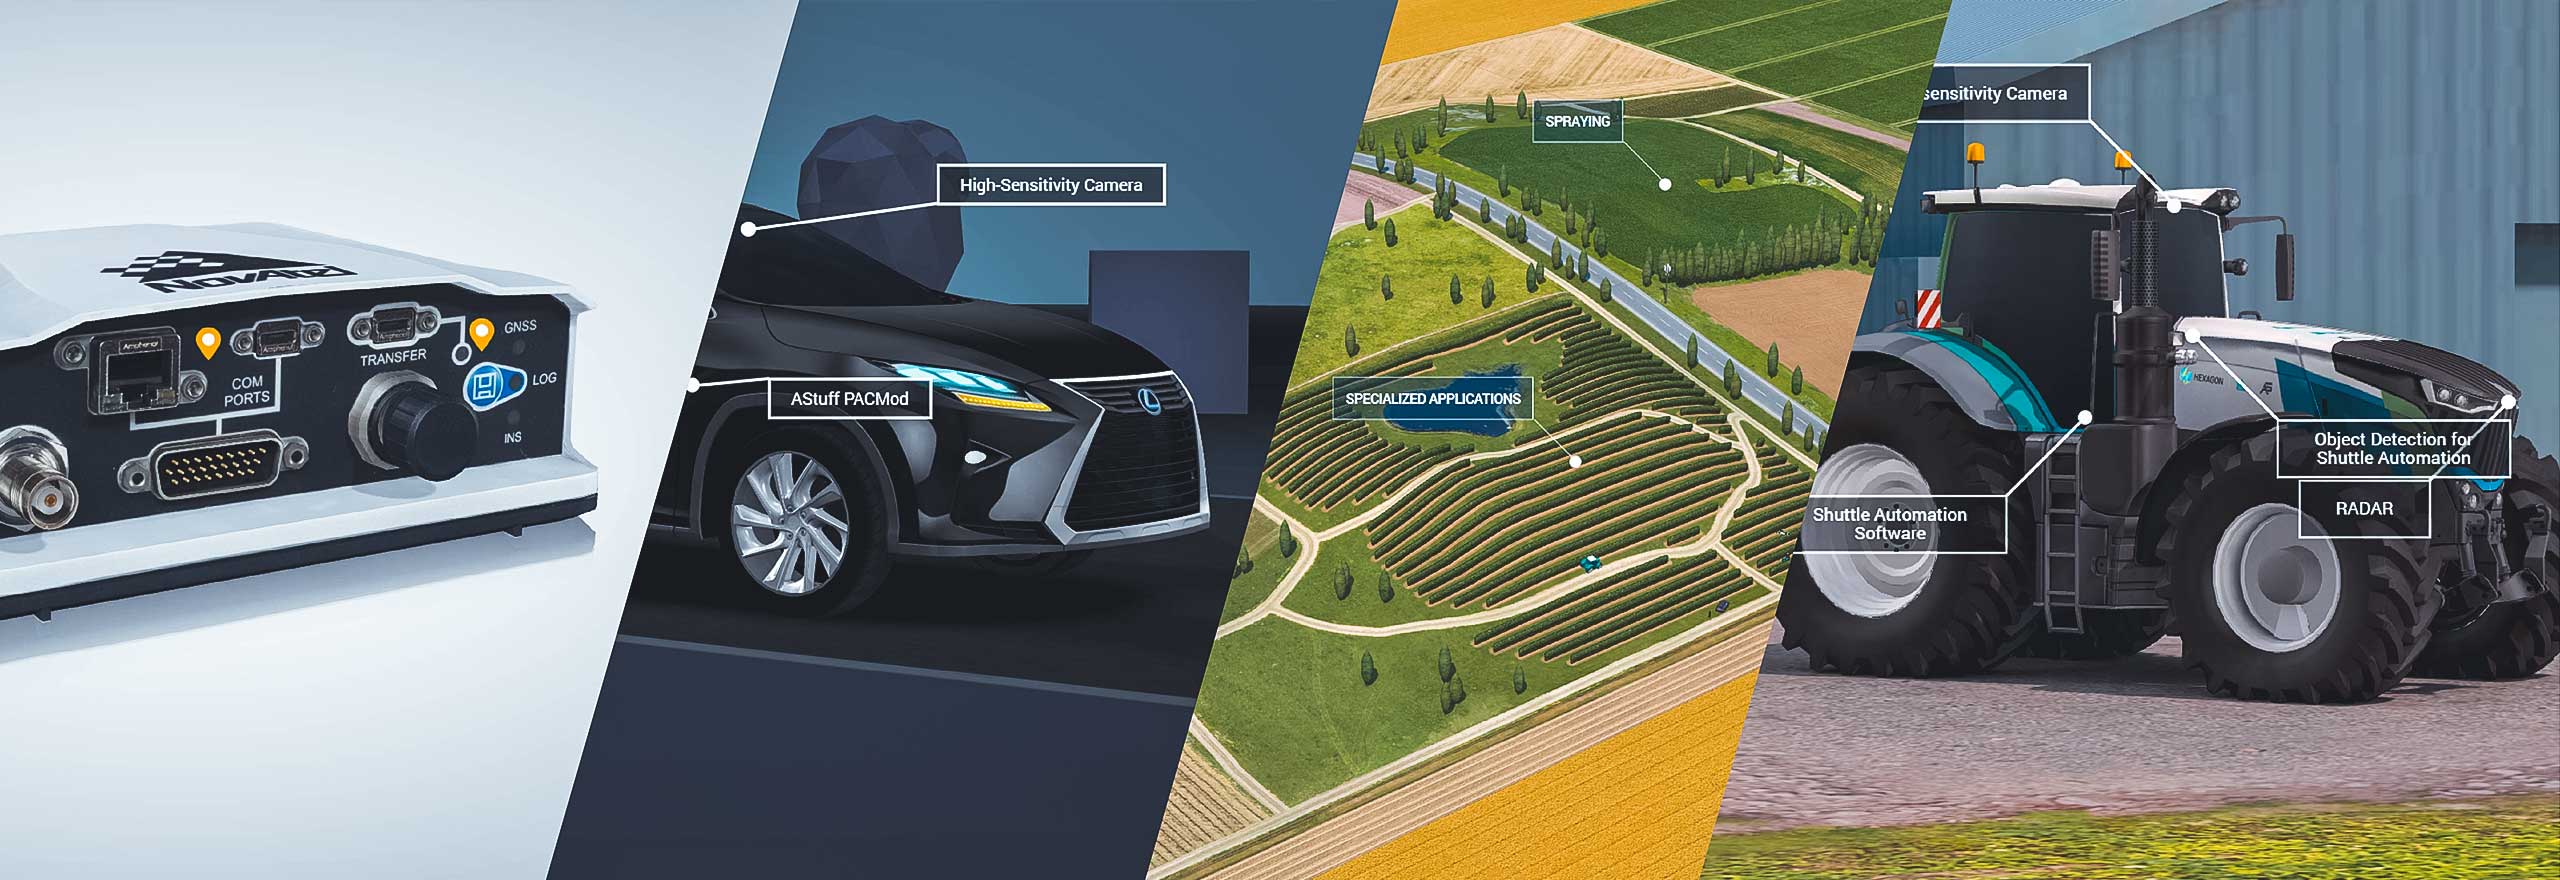 Images from the interactive 3D app show the Lexus car, PwrPak7, agriculture scene and a tractor on a blue background.